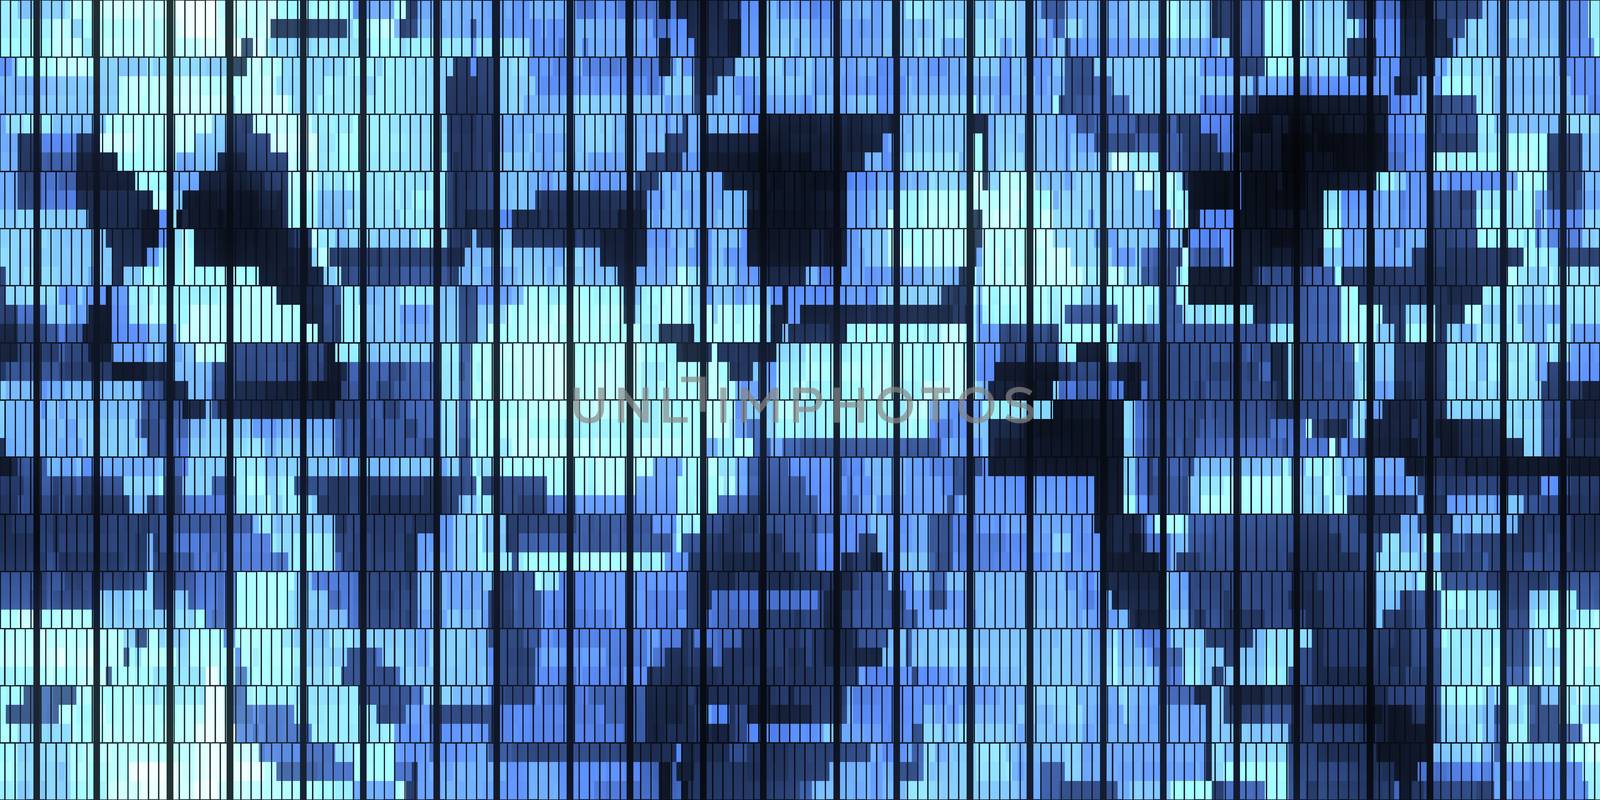 Light Blue Dna Data Code Background. Seamless Science Dna Data Code Output Sequence. Human Individuality Code Backdrops.